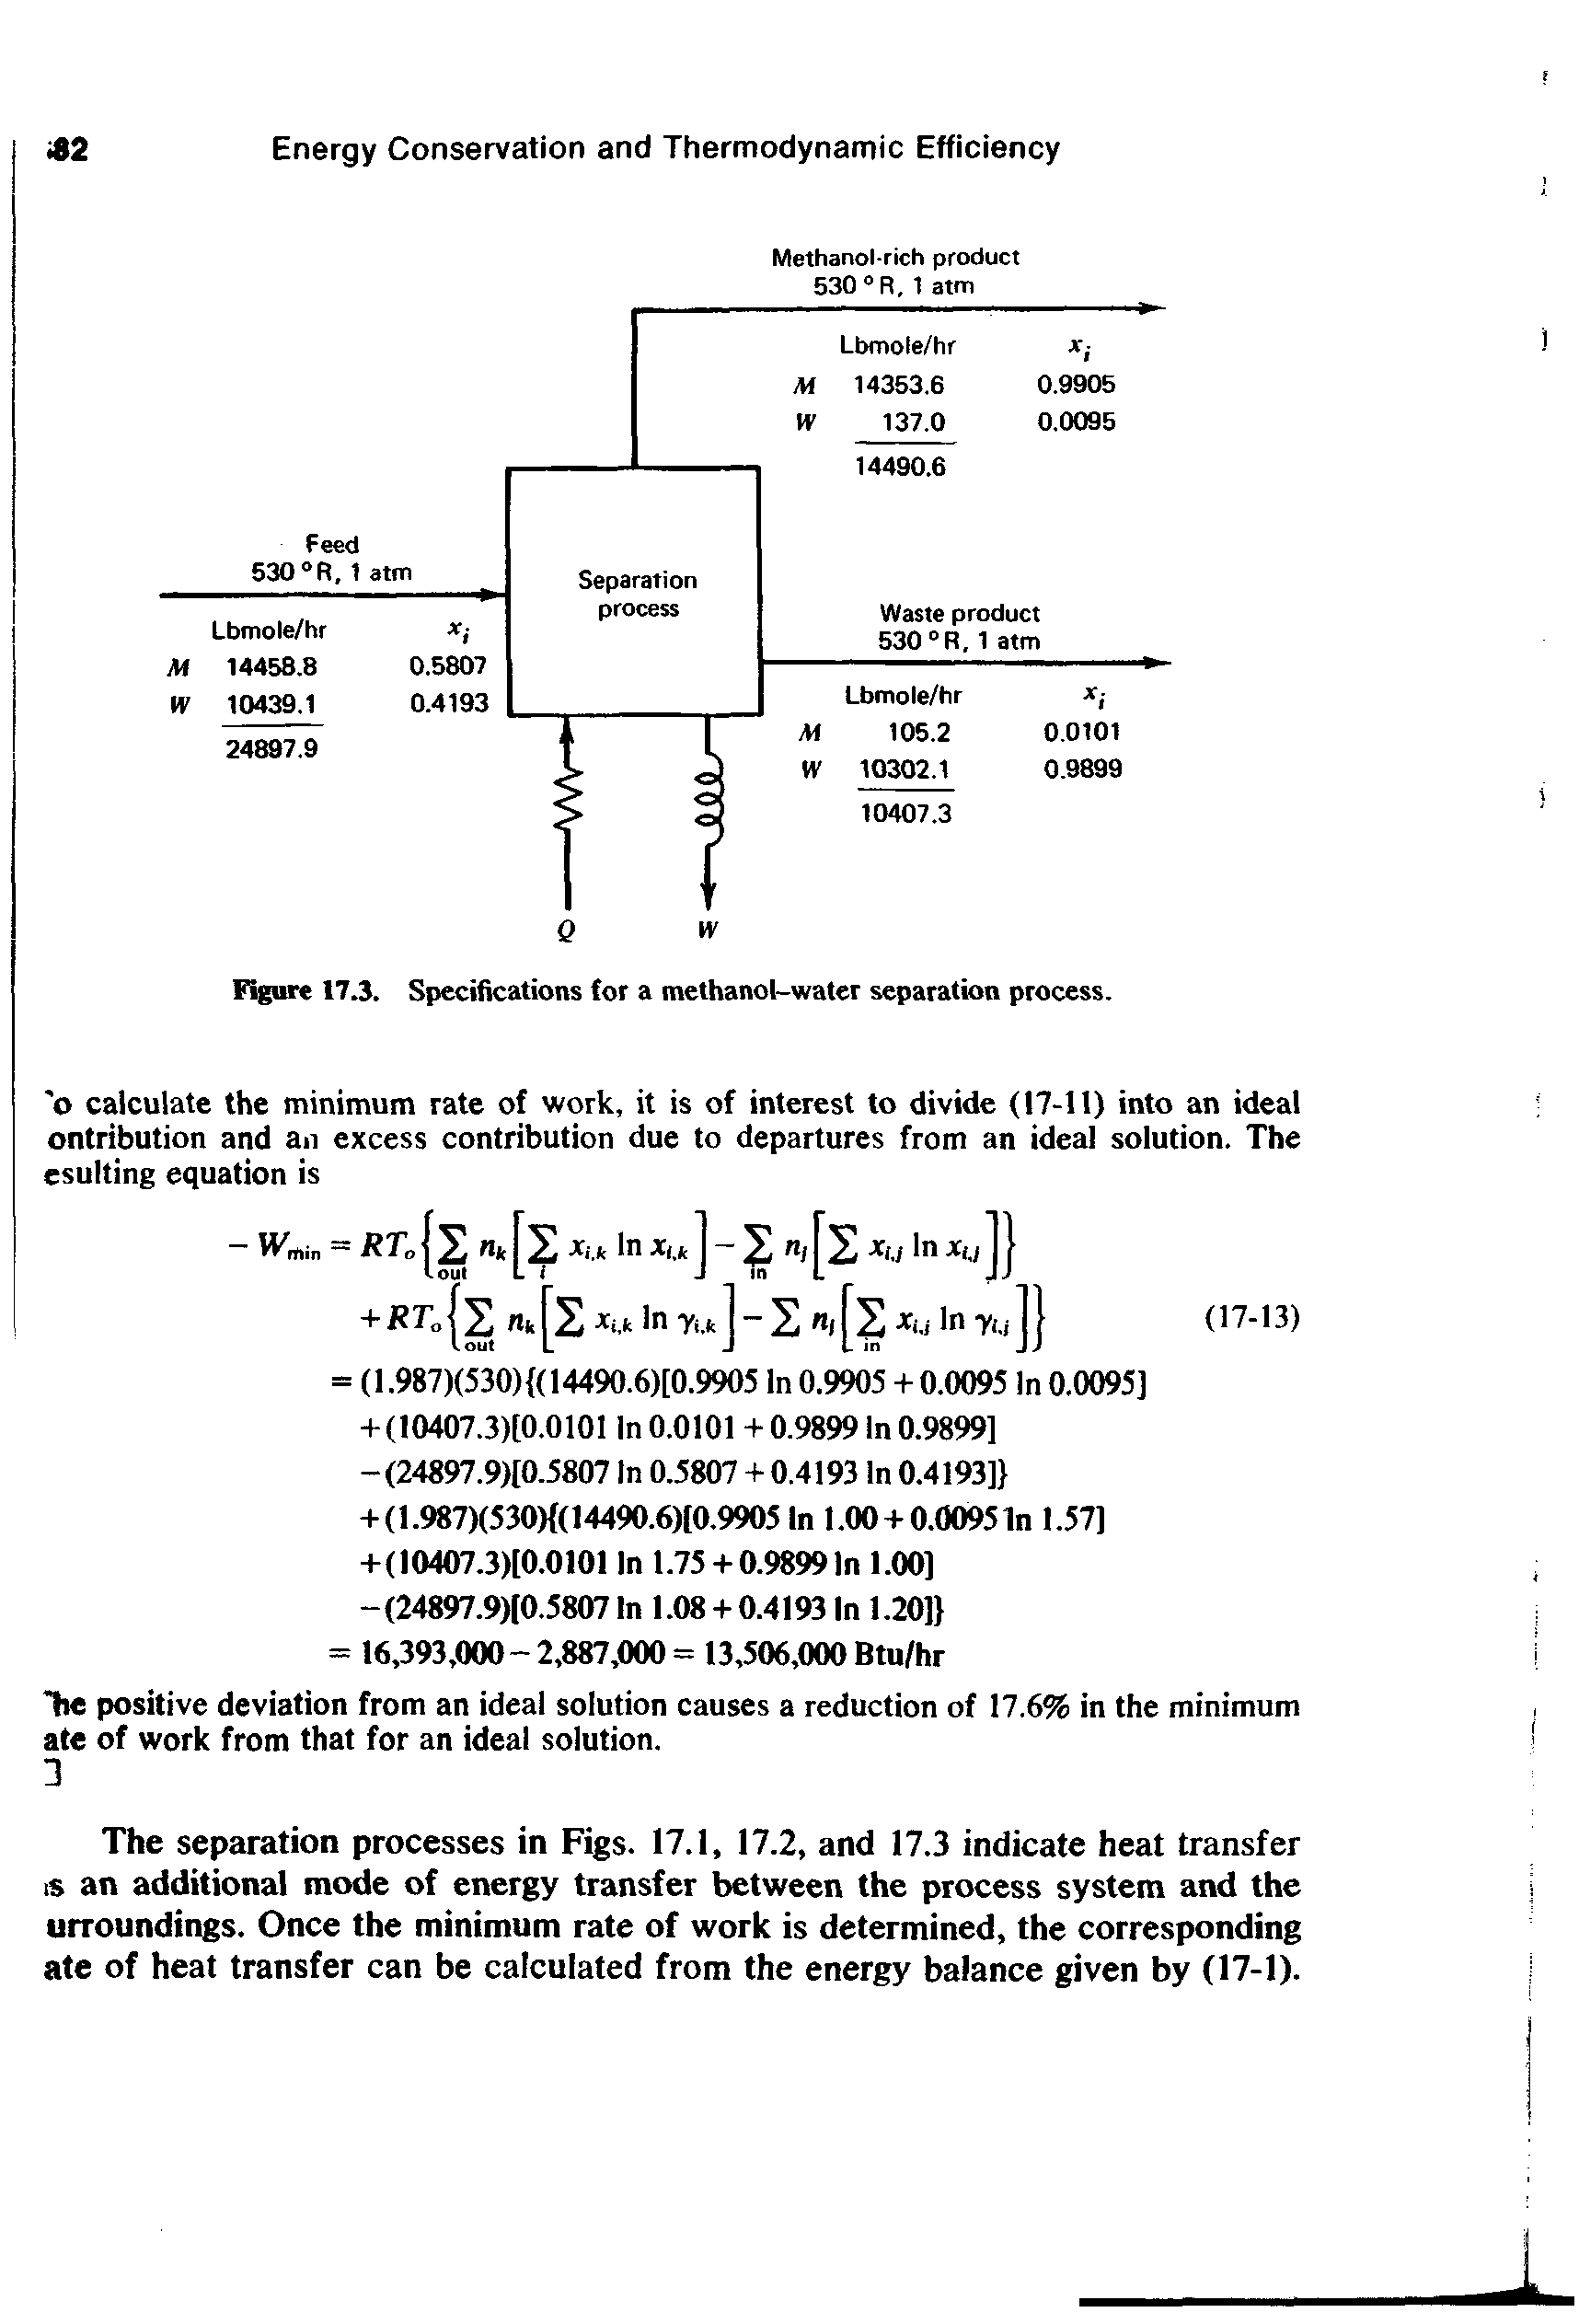 Figure 17.3. Specifications for a methanol-water separation process.